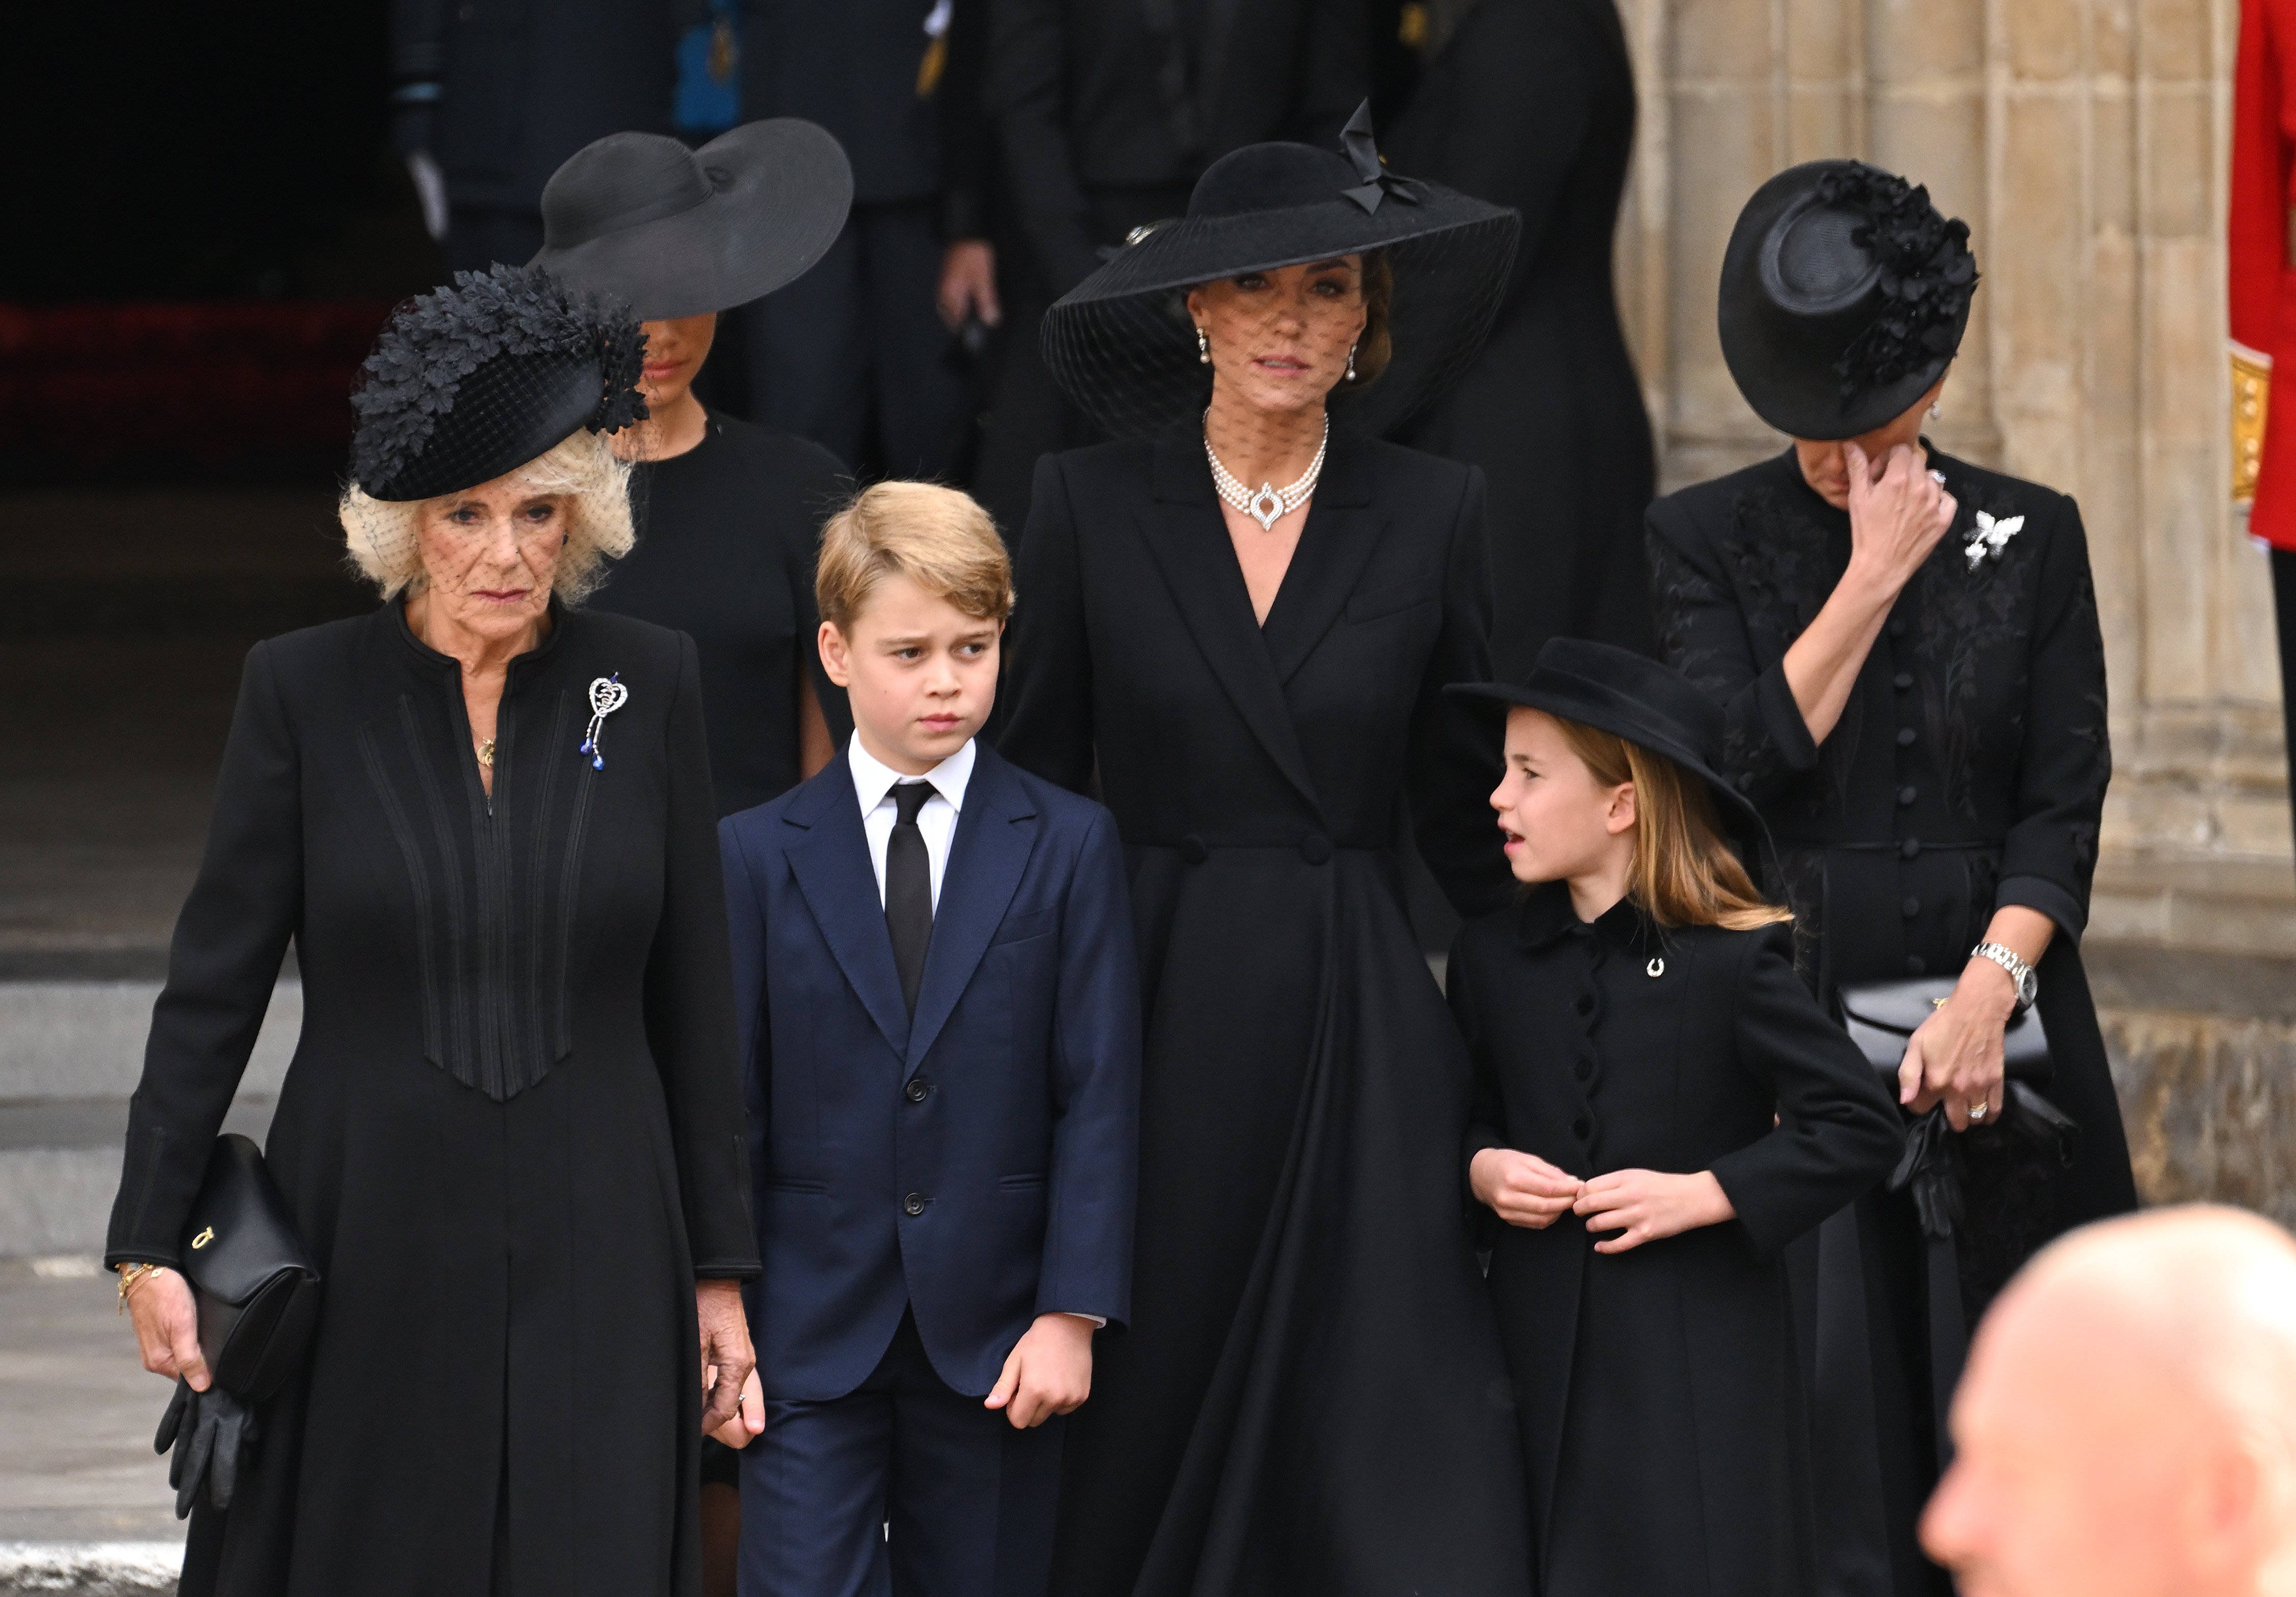 Camilla, Queen Consort, Prince George of Wales, Kate Middleton, Princess Charlotte and Sophie Wessex during the State Funeral of Queen Elizabeth II AT Westminster Abbey in 2022. | Source: Getty Images